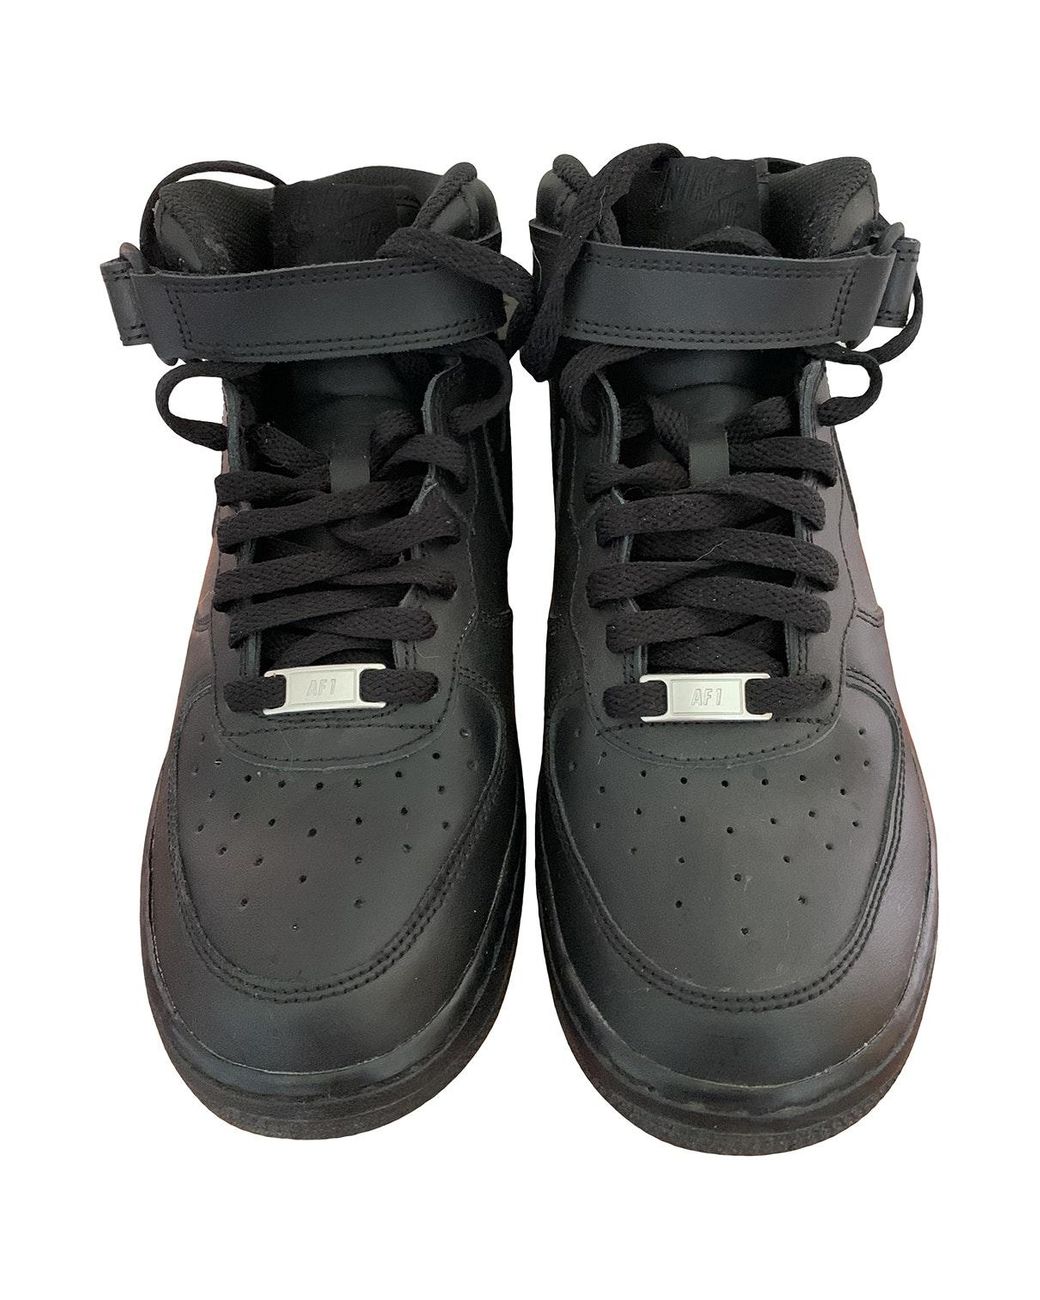 Nike Air Force 1 Leather Trainers in Black - Lyst